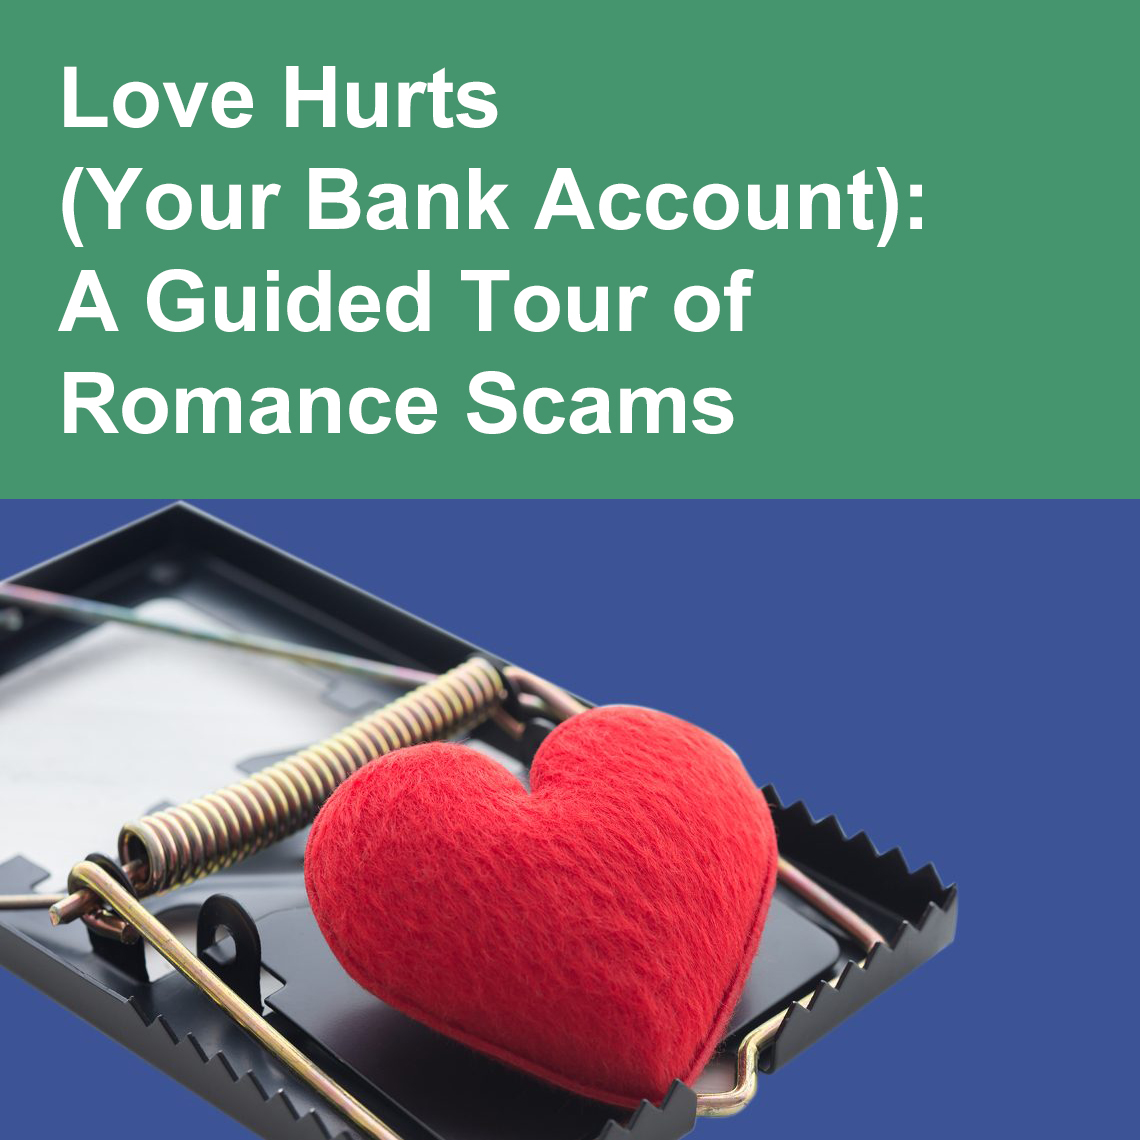 Love Hurts (Your Bank Account): A Guided Tour of Romance Scams